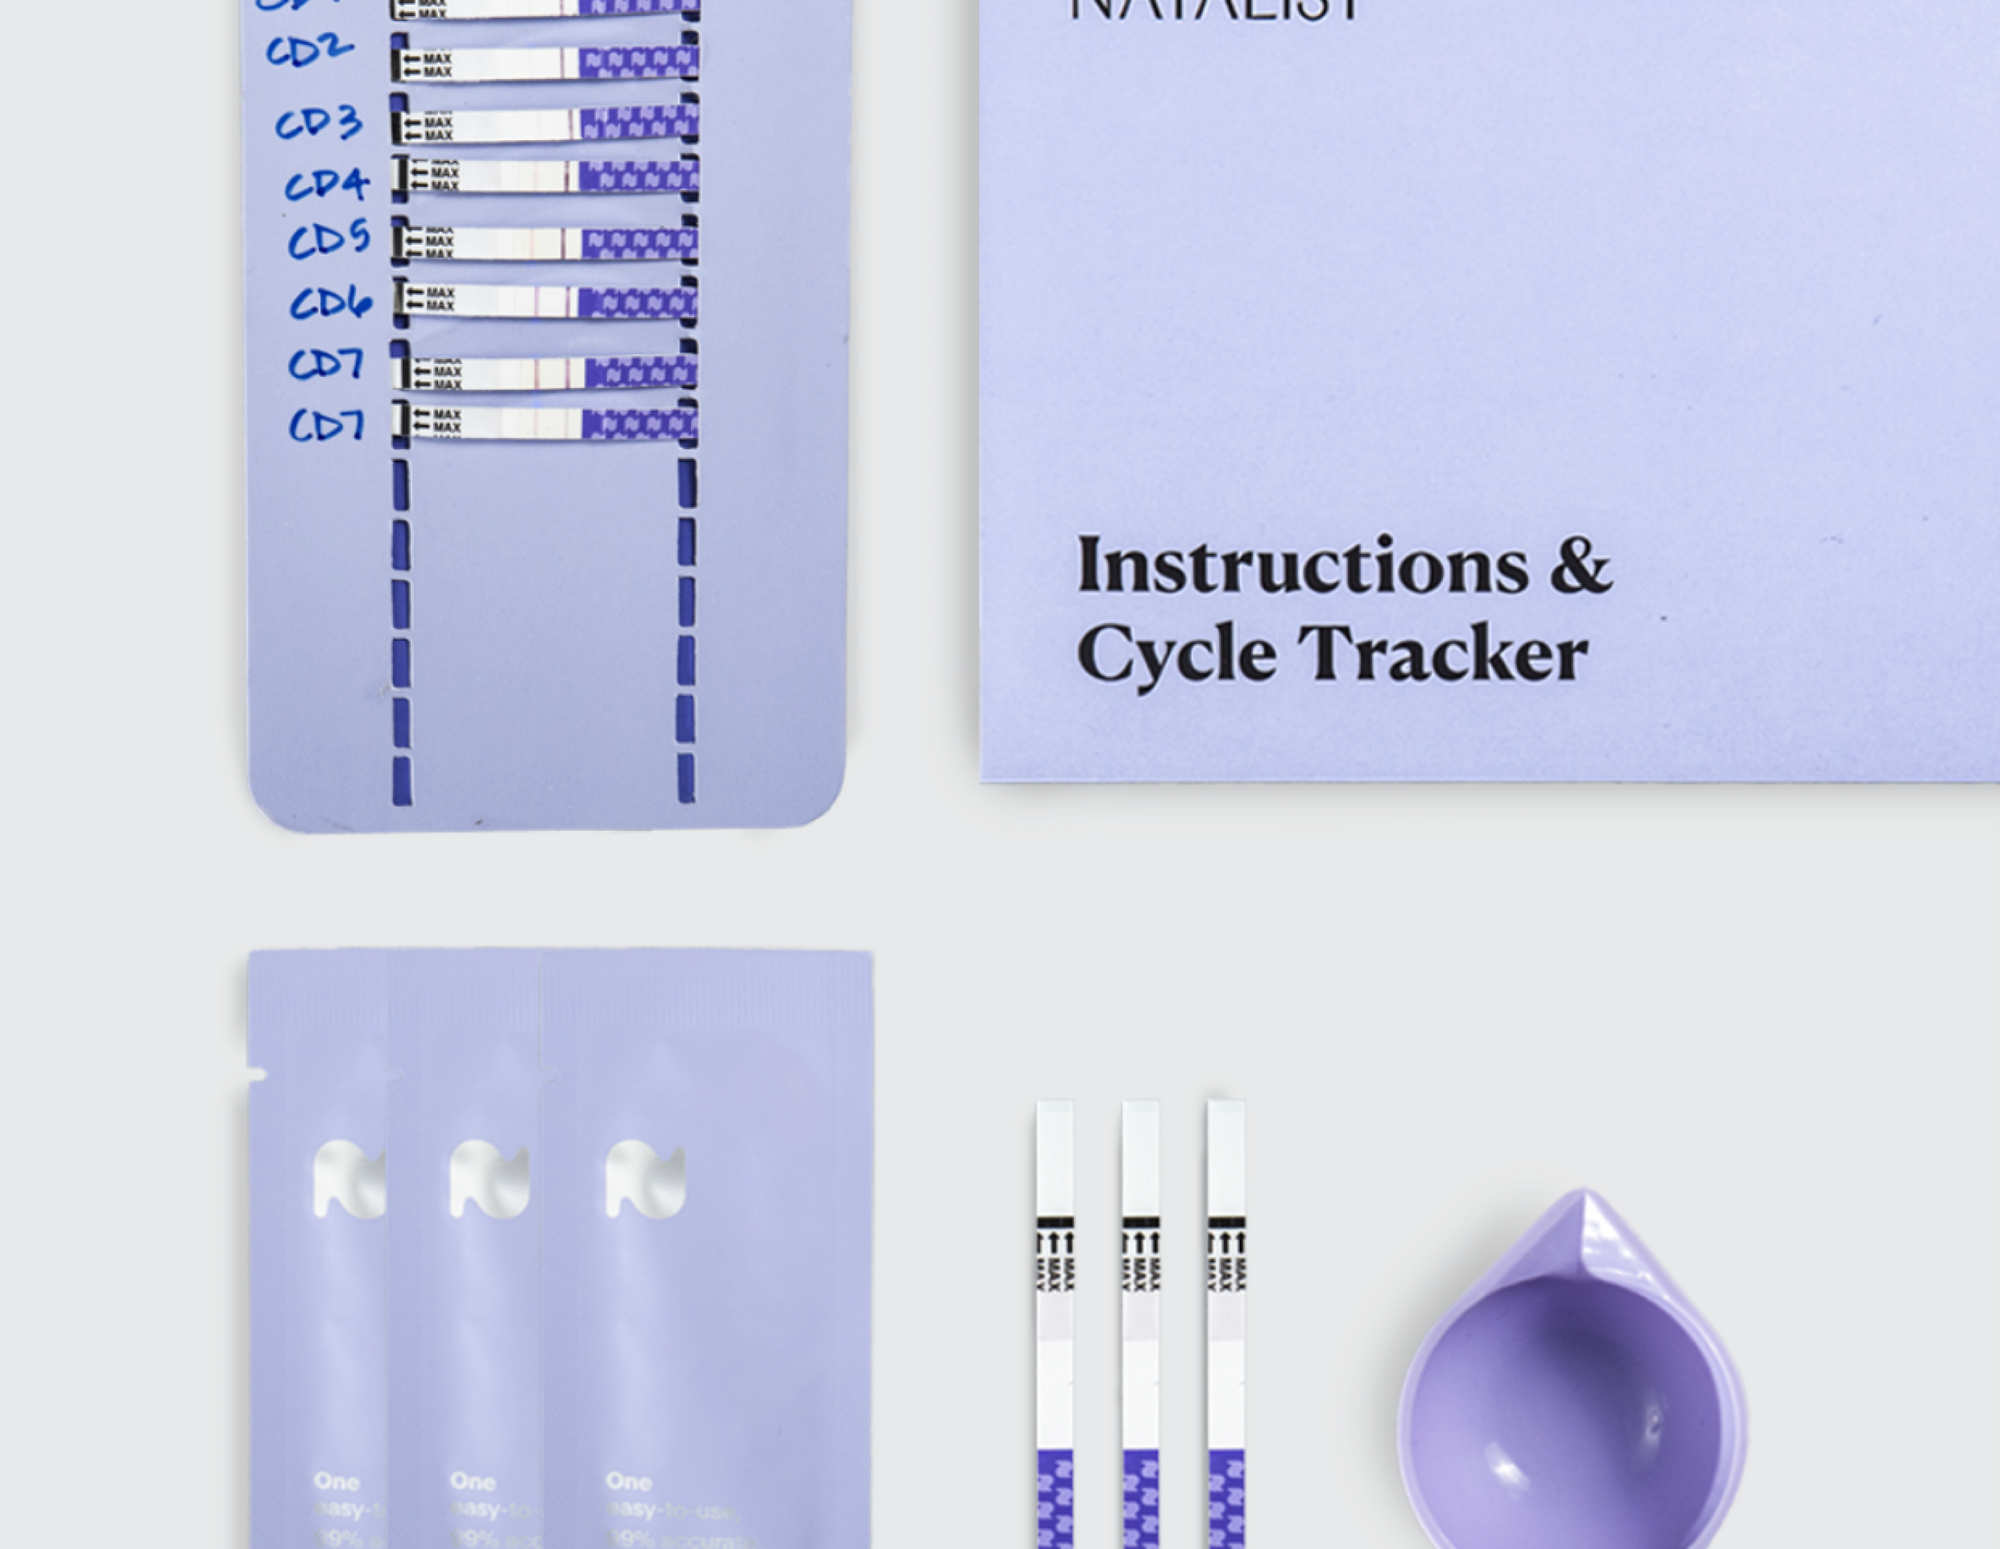 OVULATION: Understanding Your Fertile Window and Cycle Tracking 